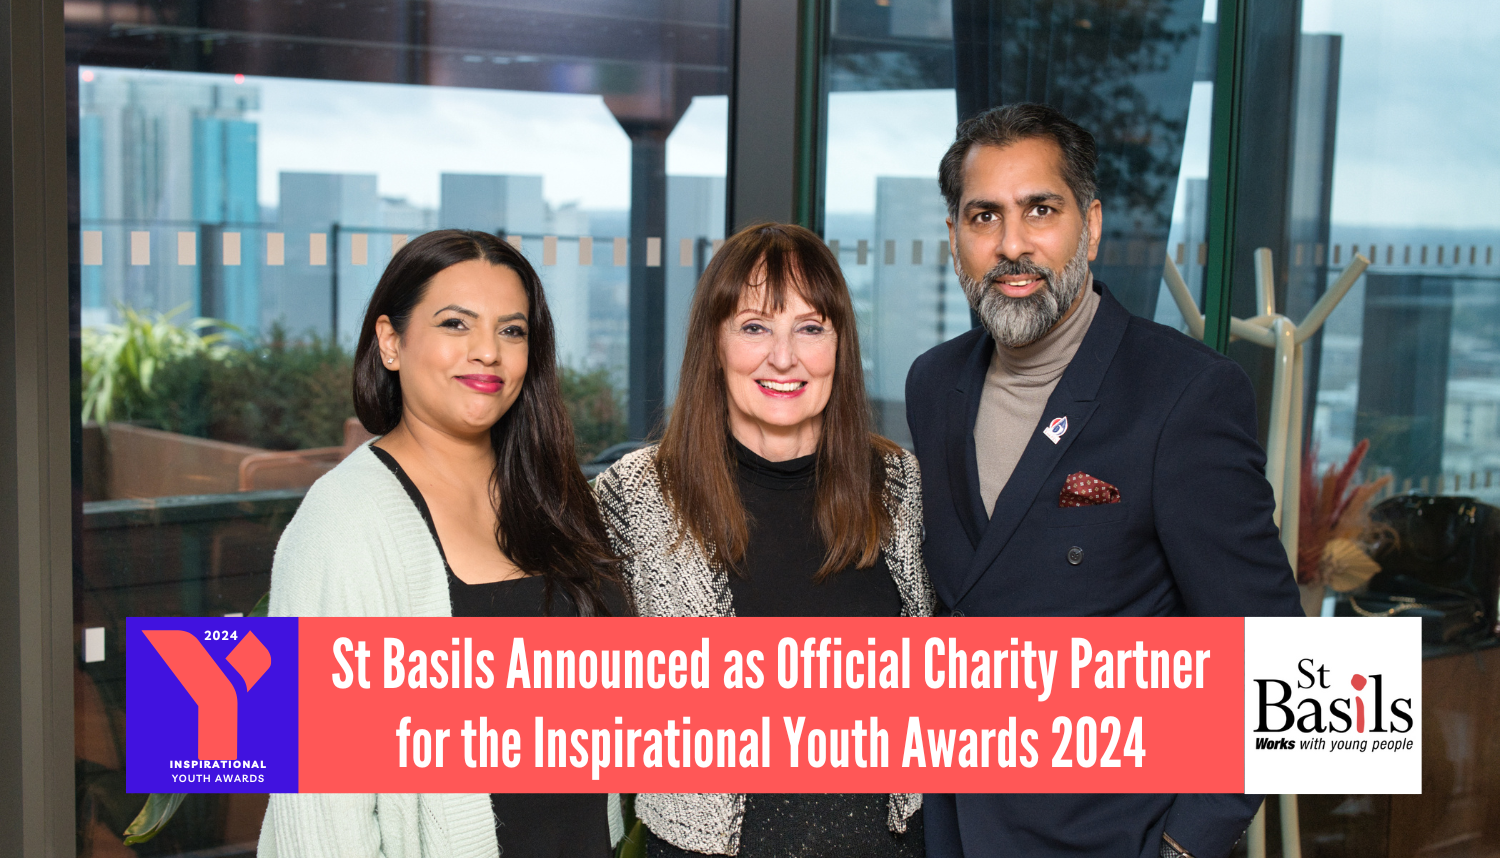 St Basils Announced as Official Charity Partner for the Inspirational Youth Awards 2024